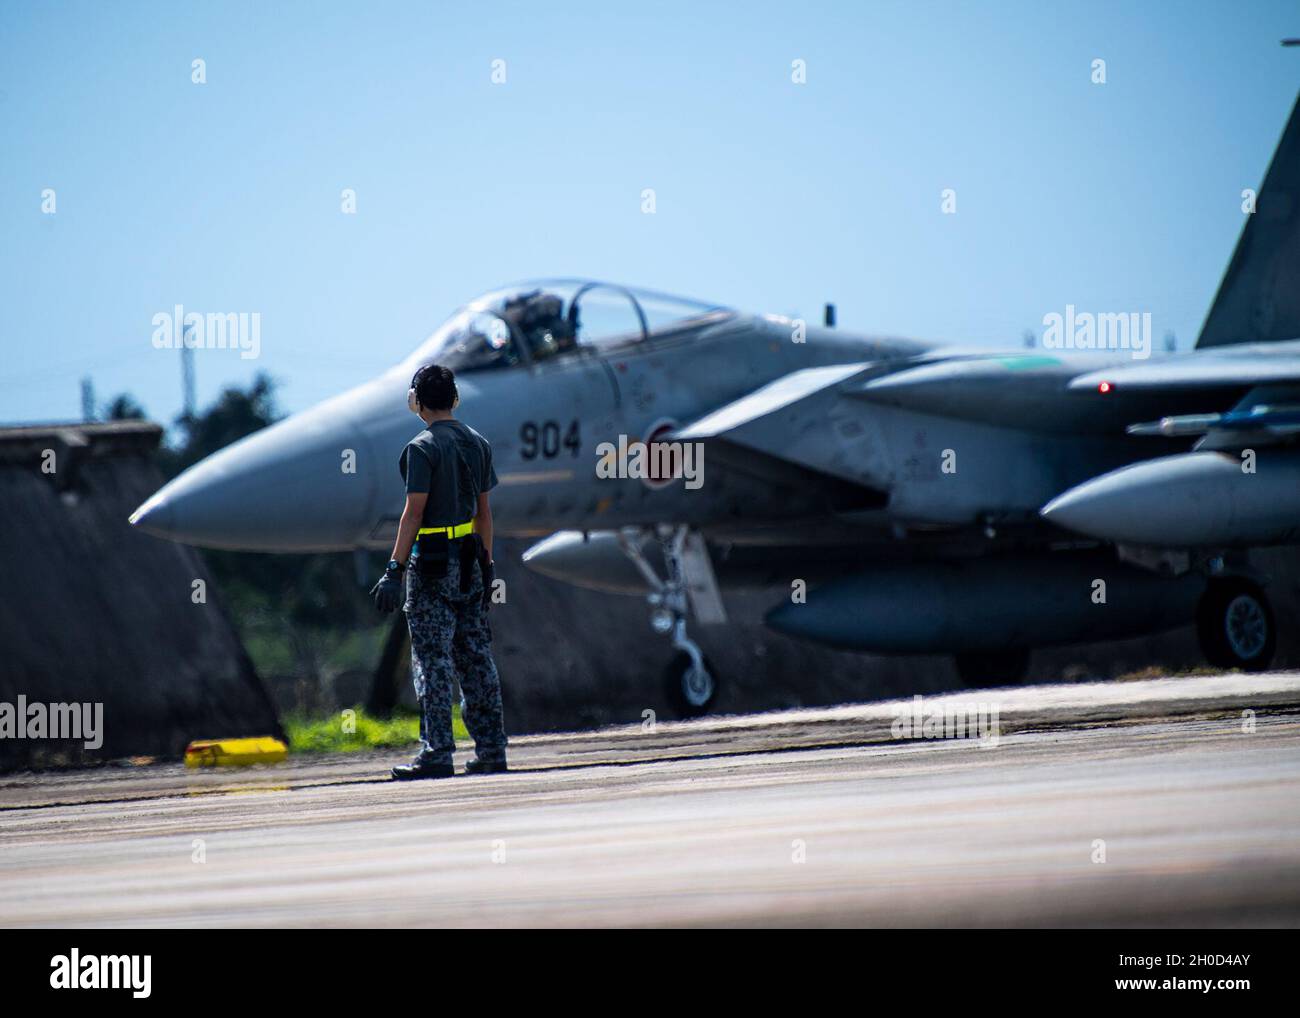 A Japan Air Self-Defense Force, or Koku-Jieitai, F-15J Eagle pulls into its parking space at Andersen Air Force Base, Guam, during exercise Cope North 21, Jan. 28, 2021.  Cope North is an annual exercise that serves as a keystone event to promote stability and security throughout the Indo-Pacific. Stock Photo